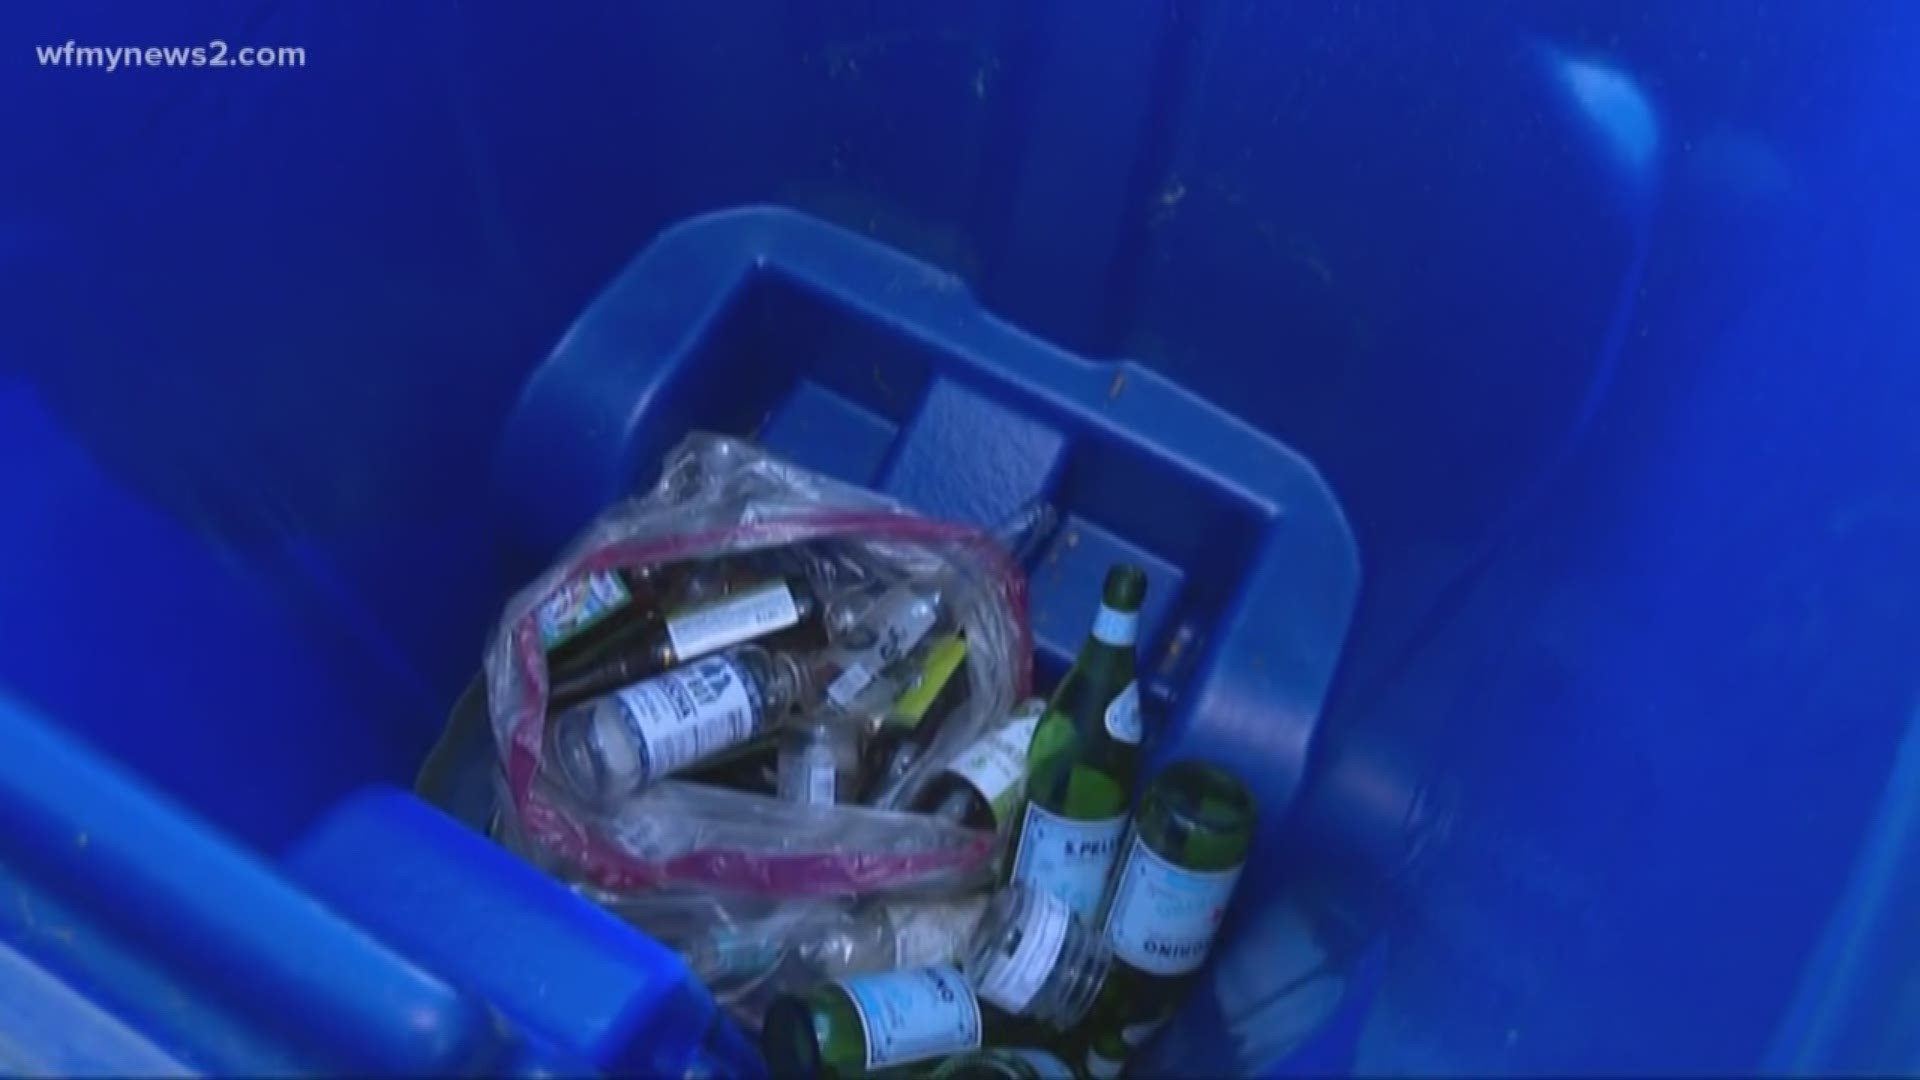 Although the new glass recycling policy has gone into effect, Greensboro's recycling center is still receiving curbside recycling with glass in it which city officials say creates problem.